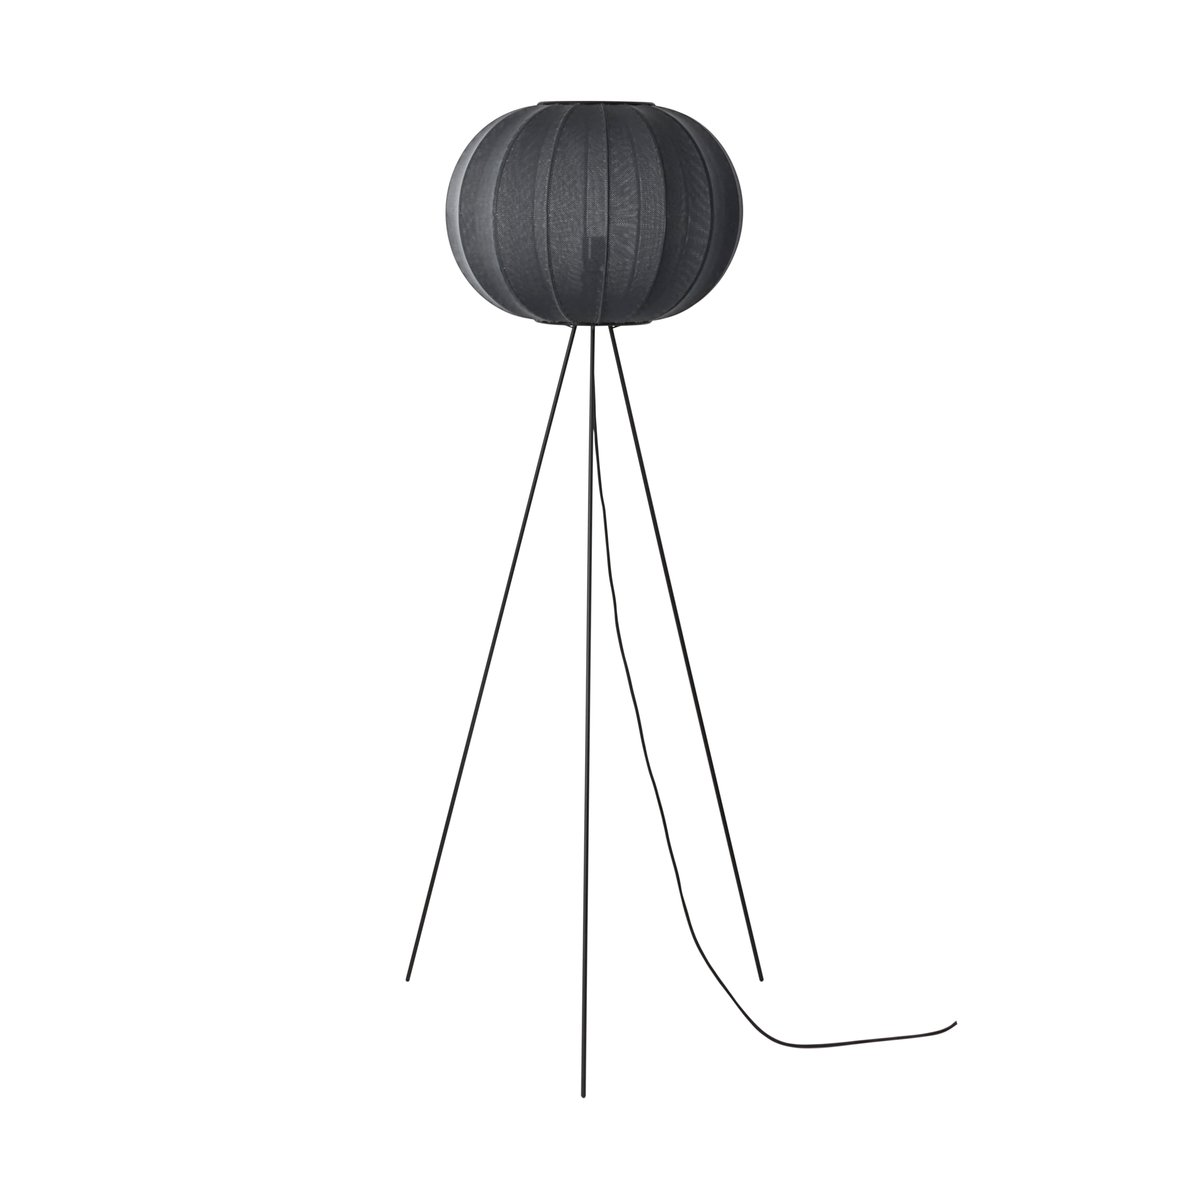 Made By Hand Knit-Wit 45 Round High vloerlamp Black